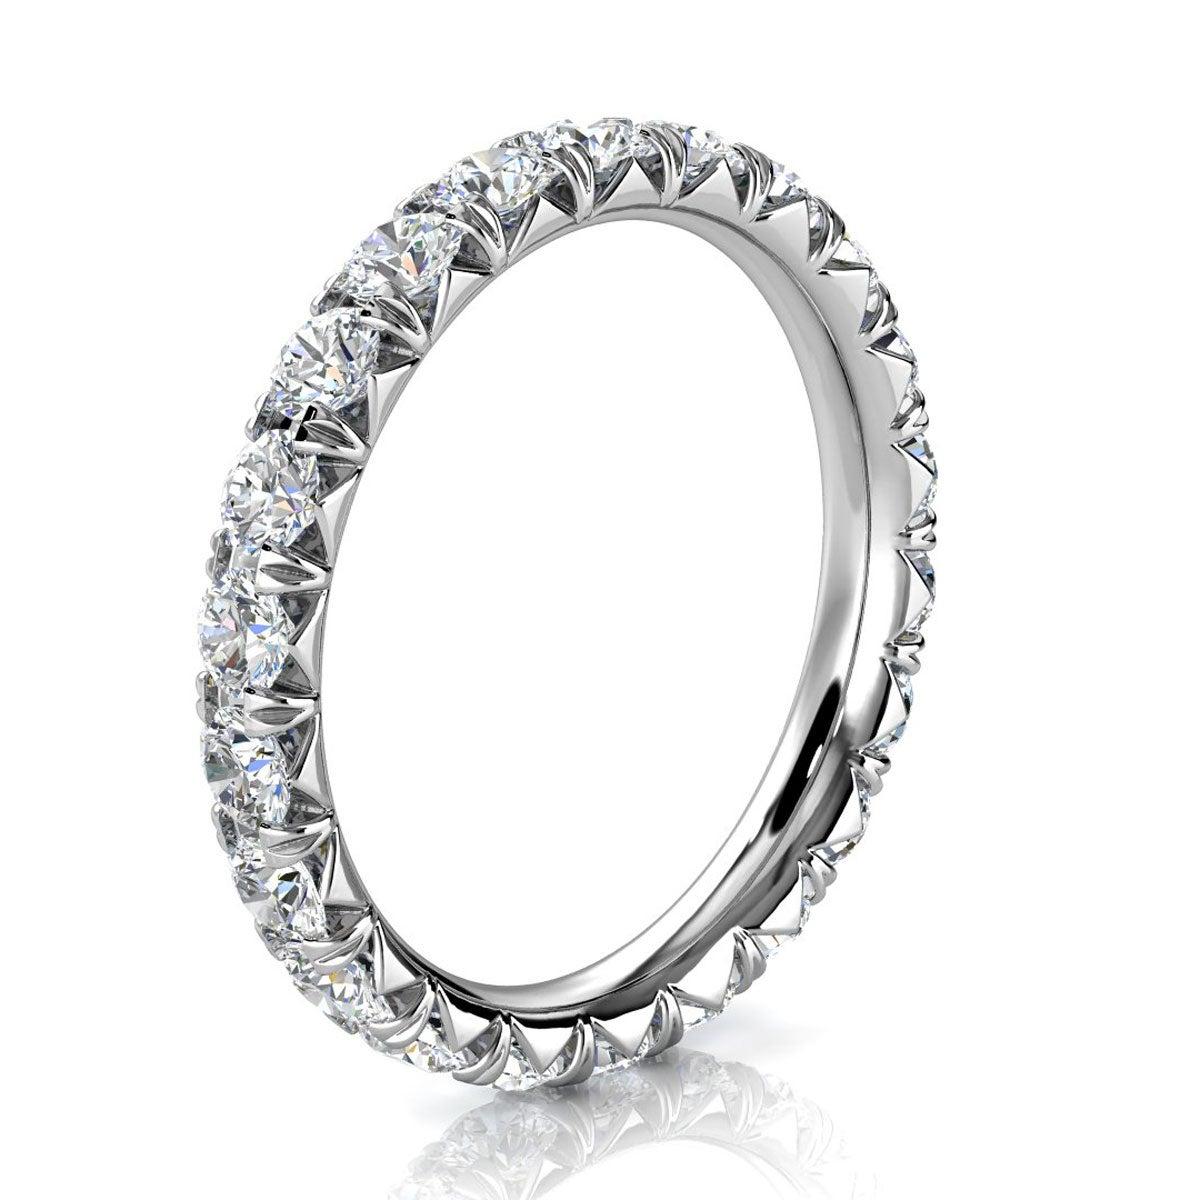 For Sale:  14K White Gold Mia French Pave Diamond Eternity Ring '1 1/2 Ct. Tw' 2